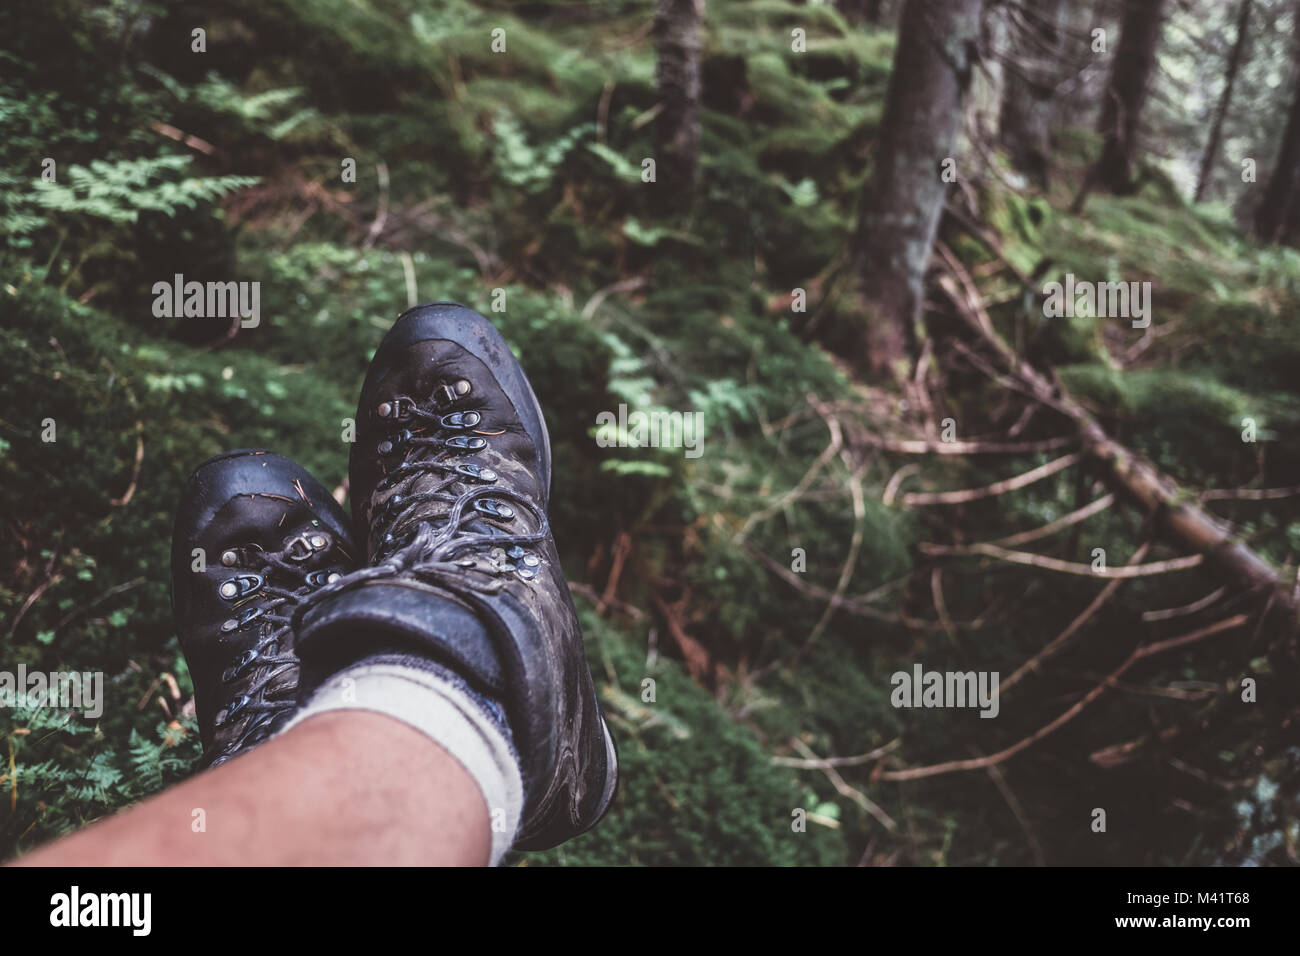 Man legs in hiking boots Stock Photo